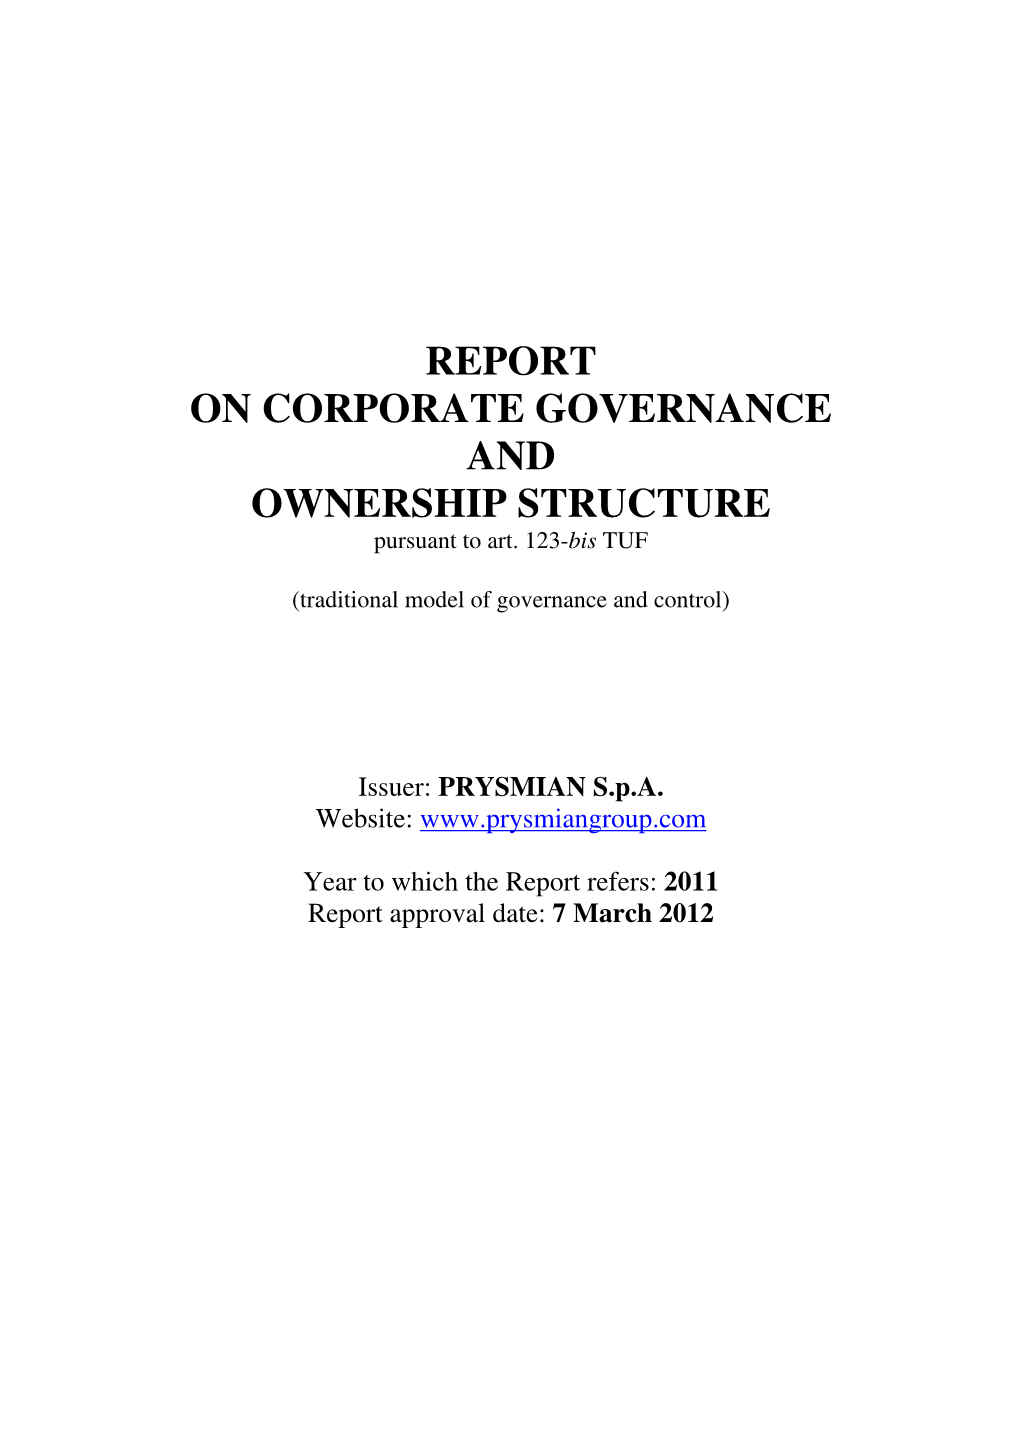 REPORT on CORPORATE GOVERNANCE and OWNERSHIP STRUCTURE Pursuant to Art